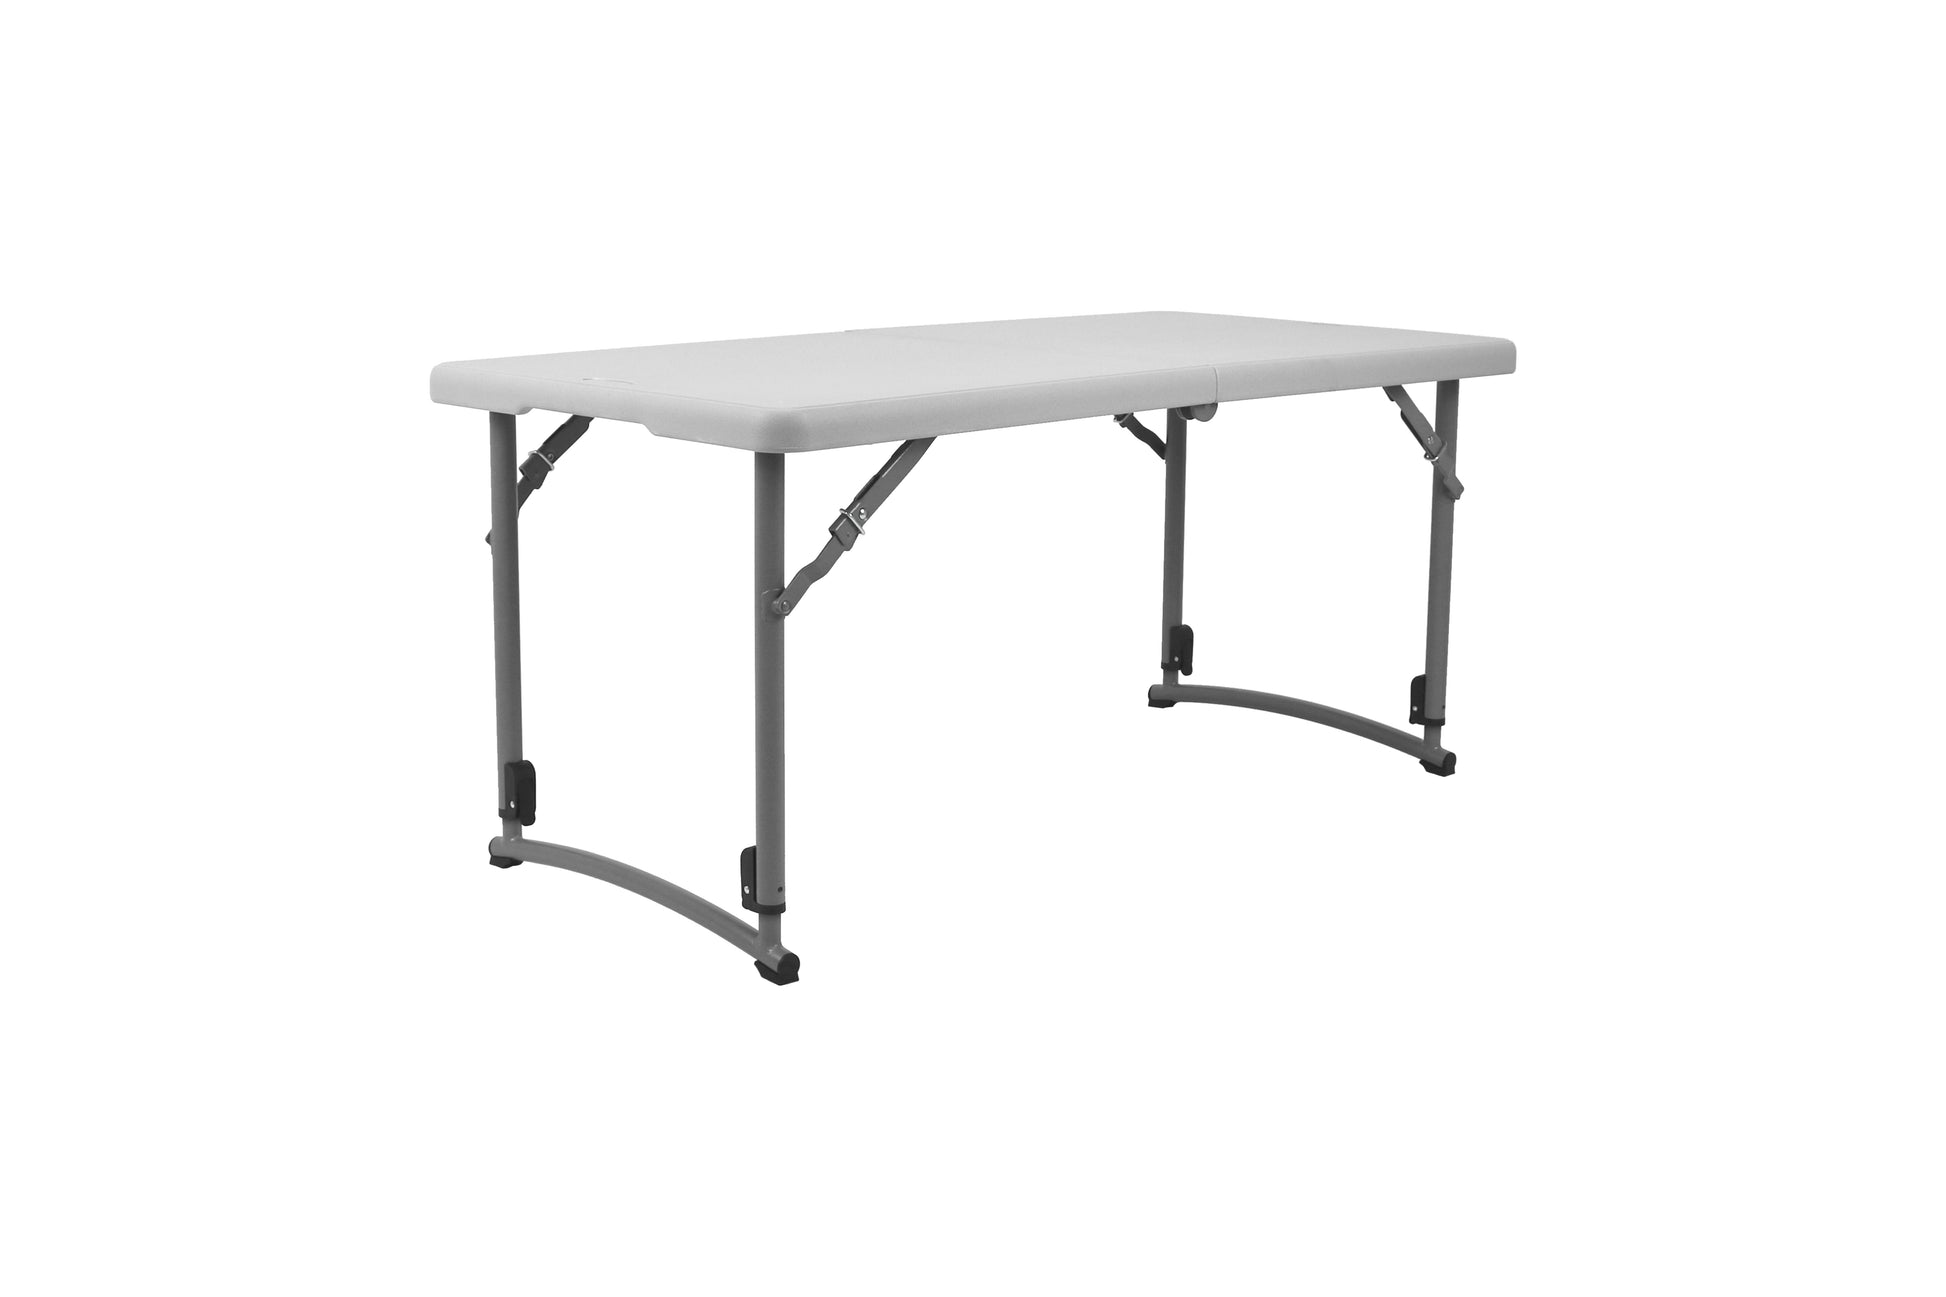 NPS Rectangular Fold-In-Half Adjustable Height Plastic Picnic Table 24" W x 48" L x 22"-35" H (BFHT-2448A)